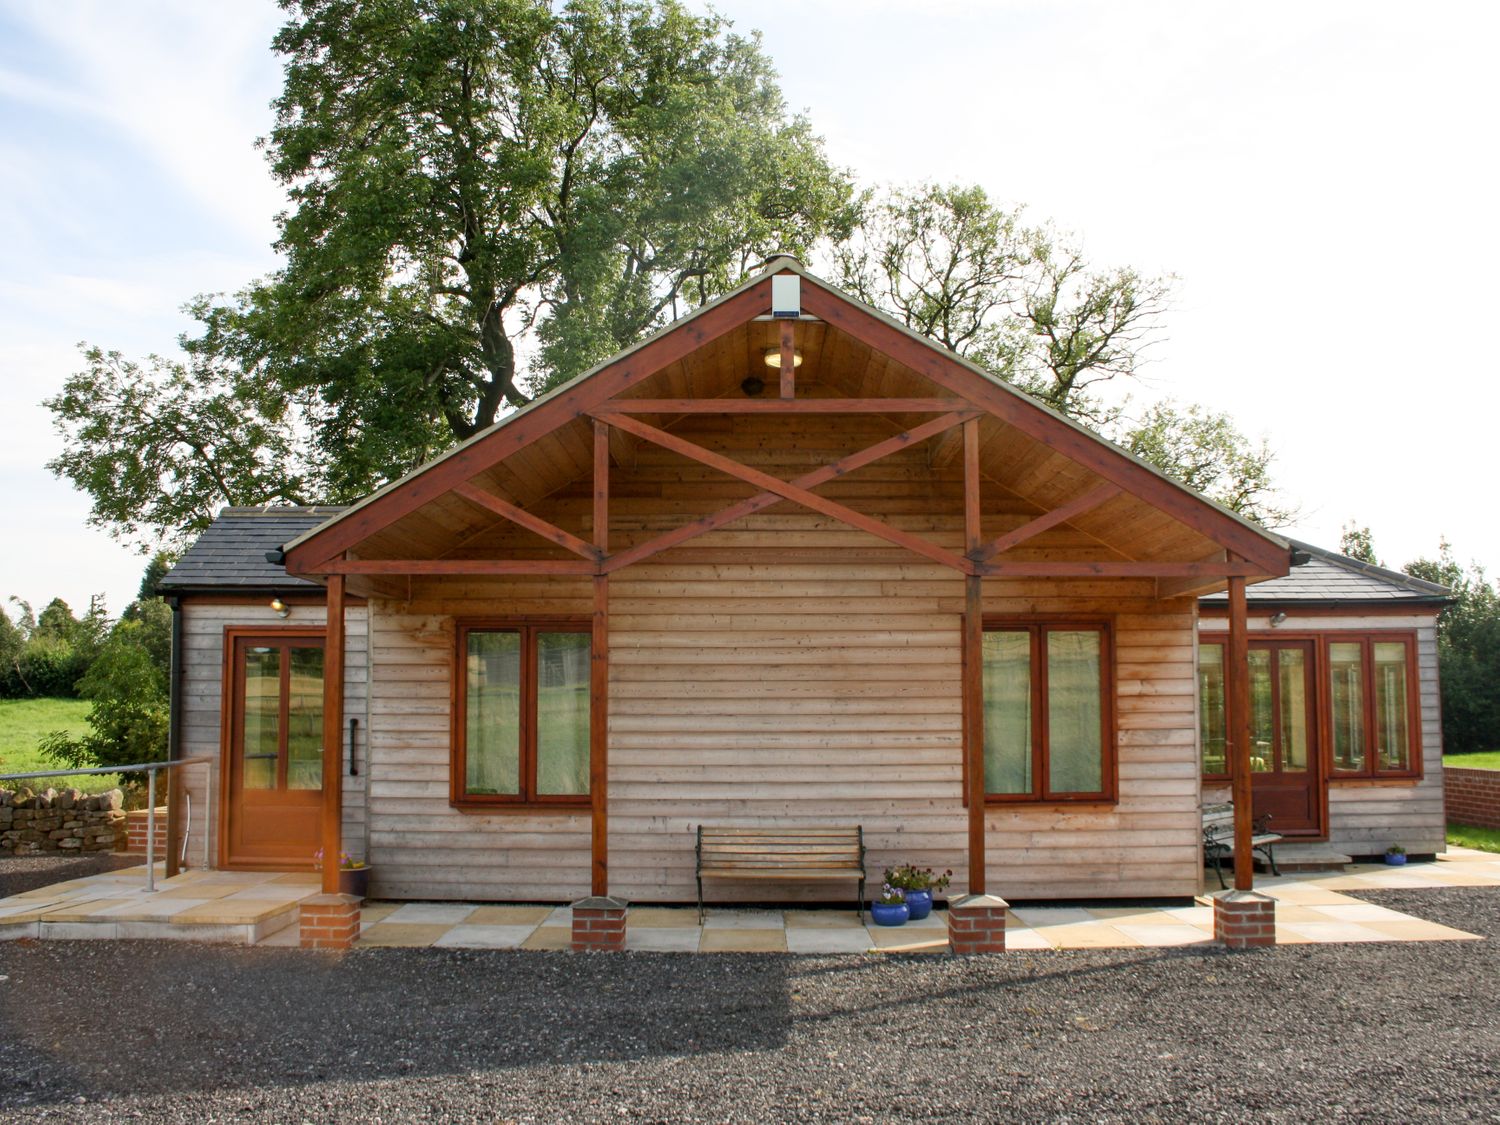 Little Owl Lodge - Yorkshire Dales - 960855 - photo 1